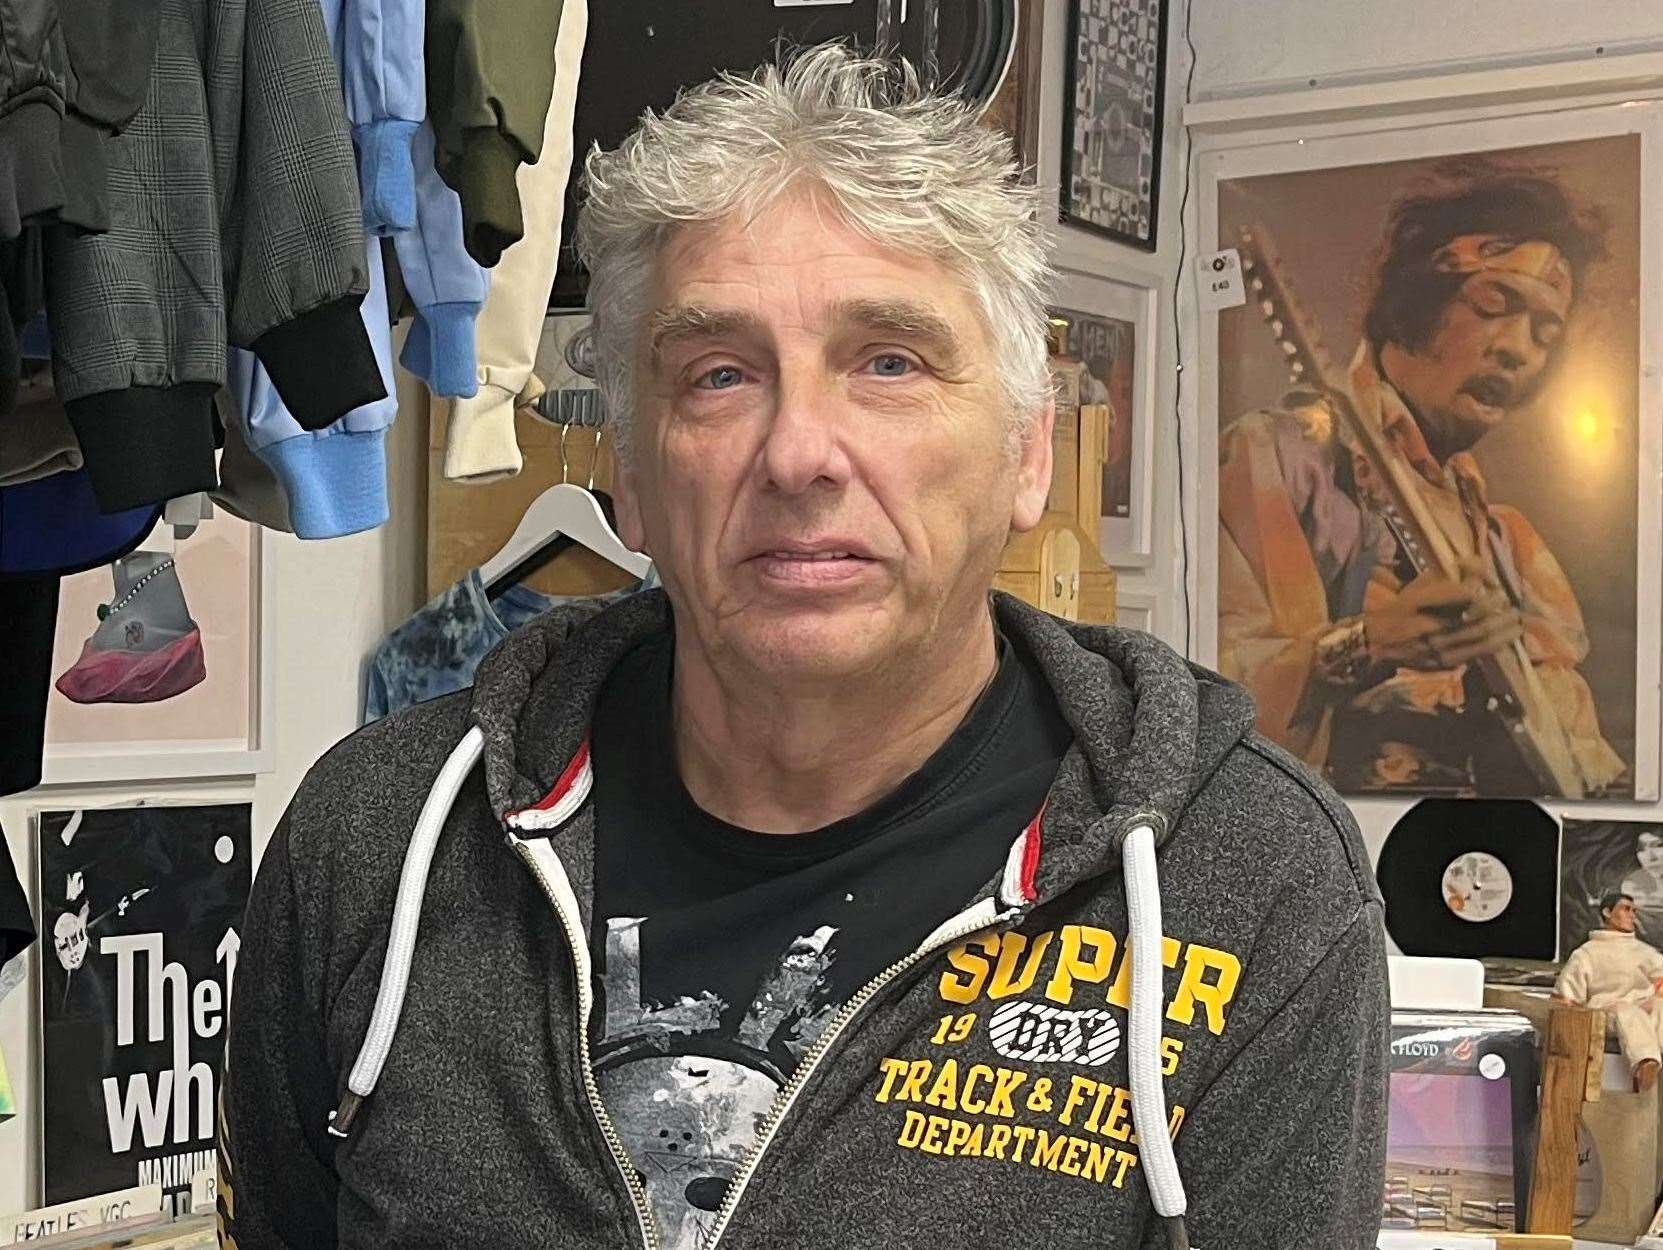 Vince Monticelli runs The Record Store in Park Mall shopping centre